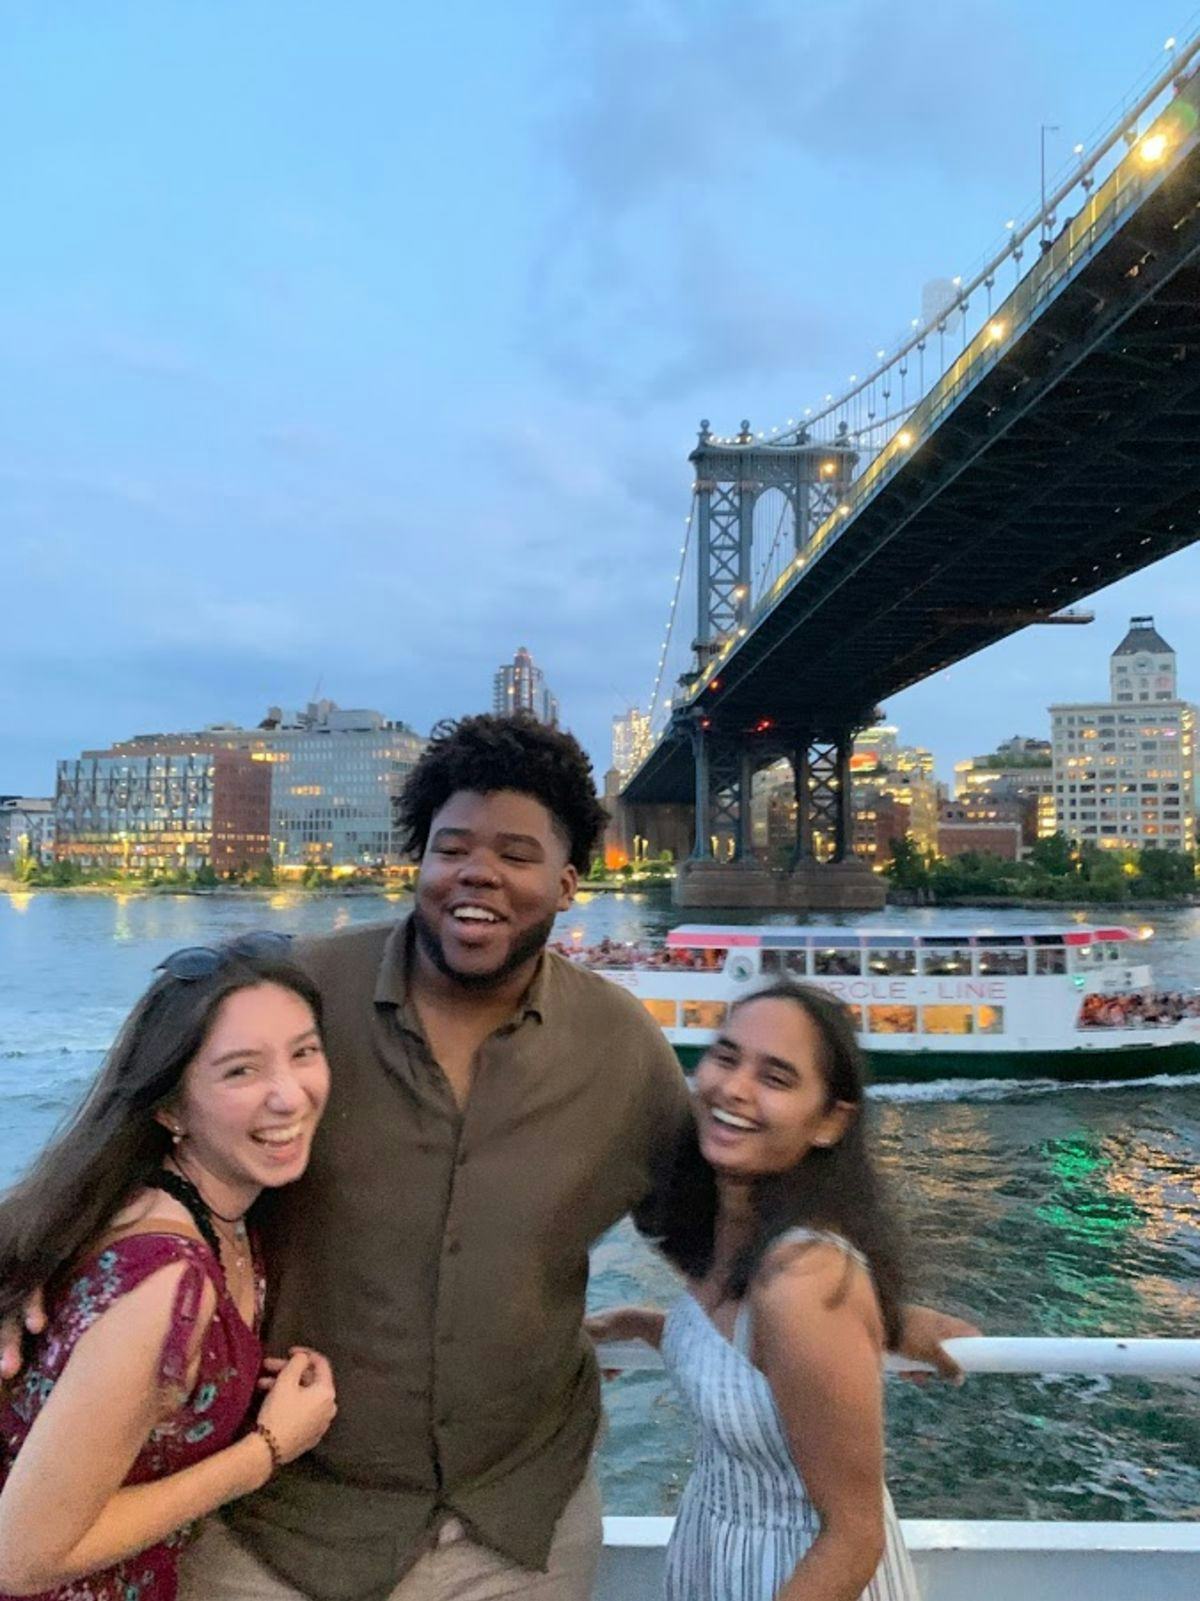 DuJaun Kirk and two friends on the waterfront in New York City